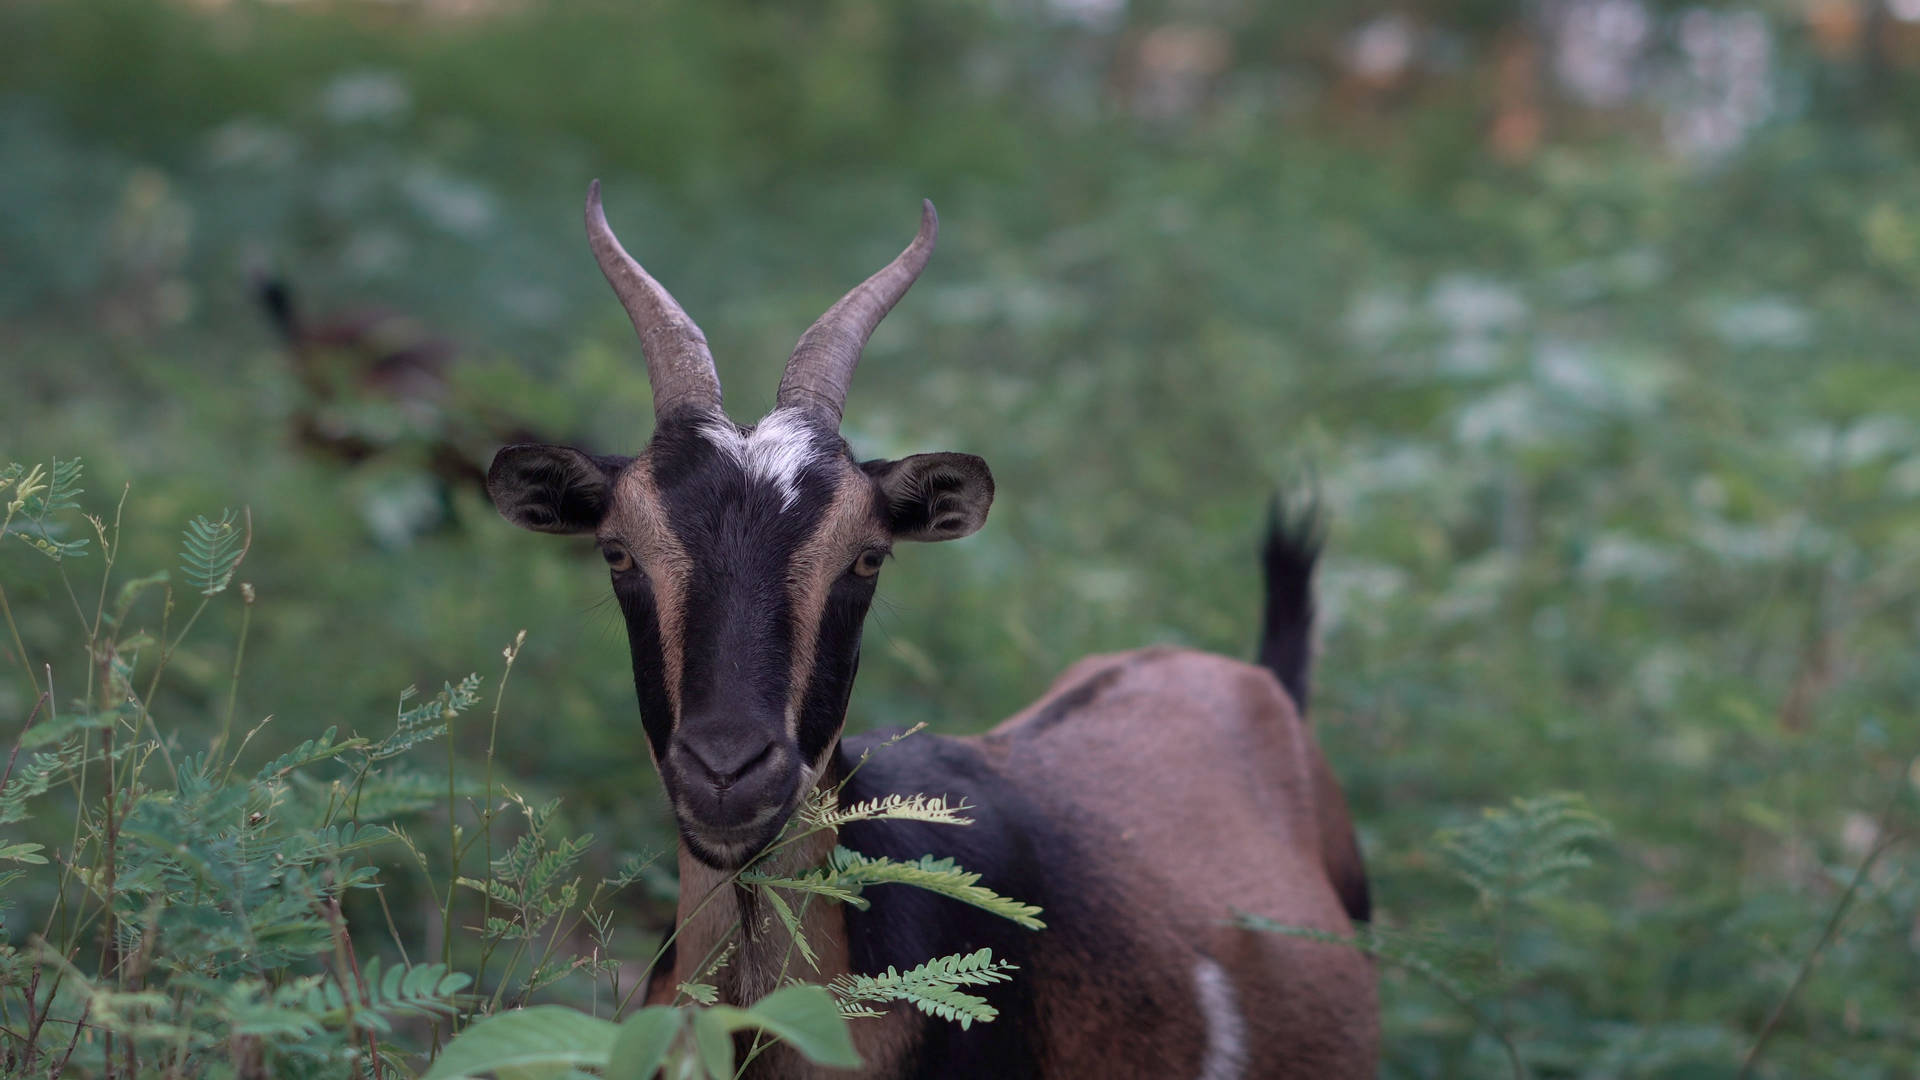 A happy brown and black goat enjoys life in nature Wallpaper